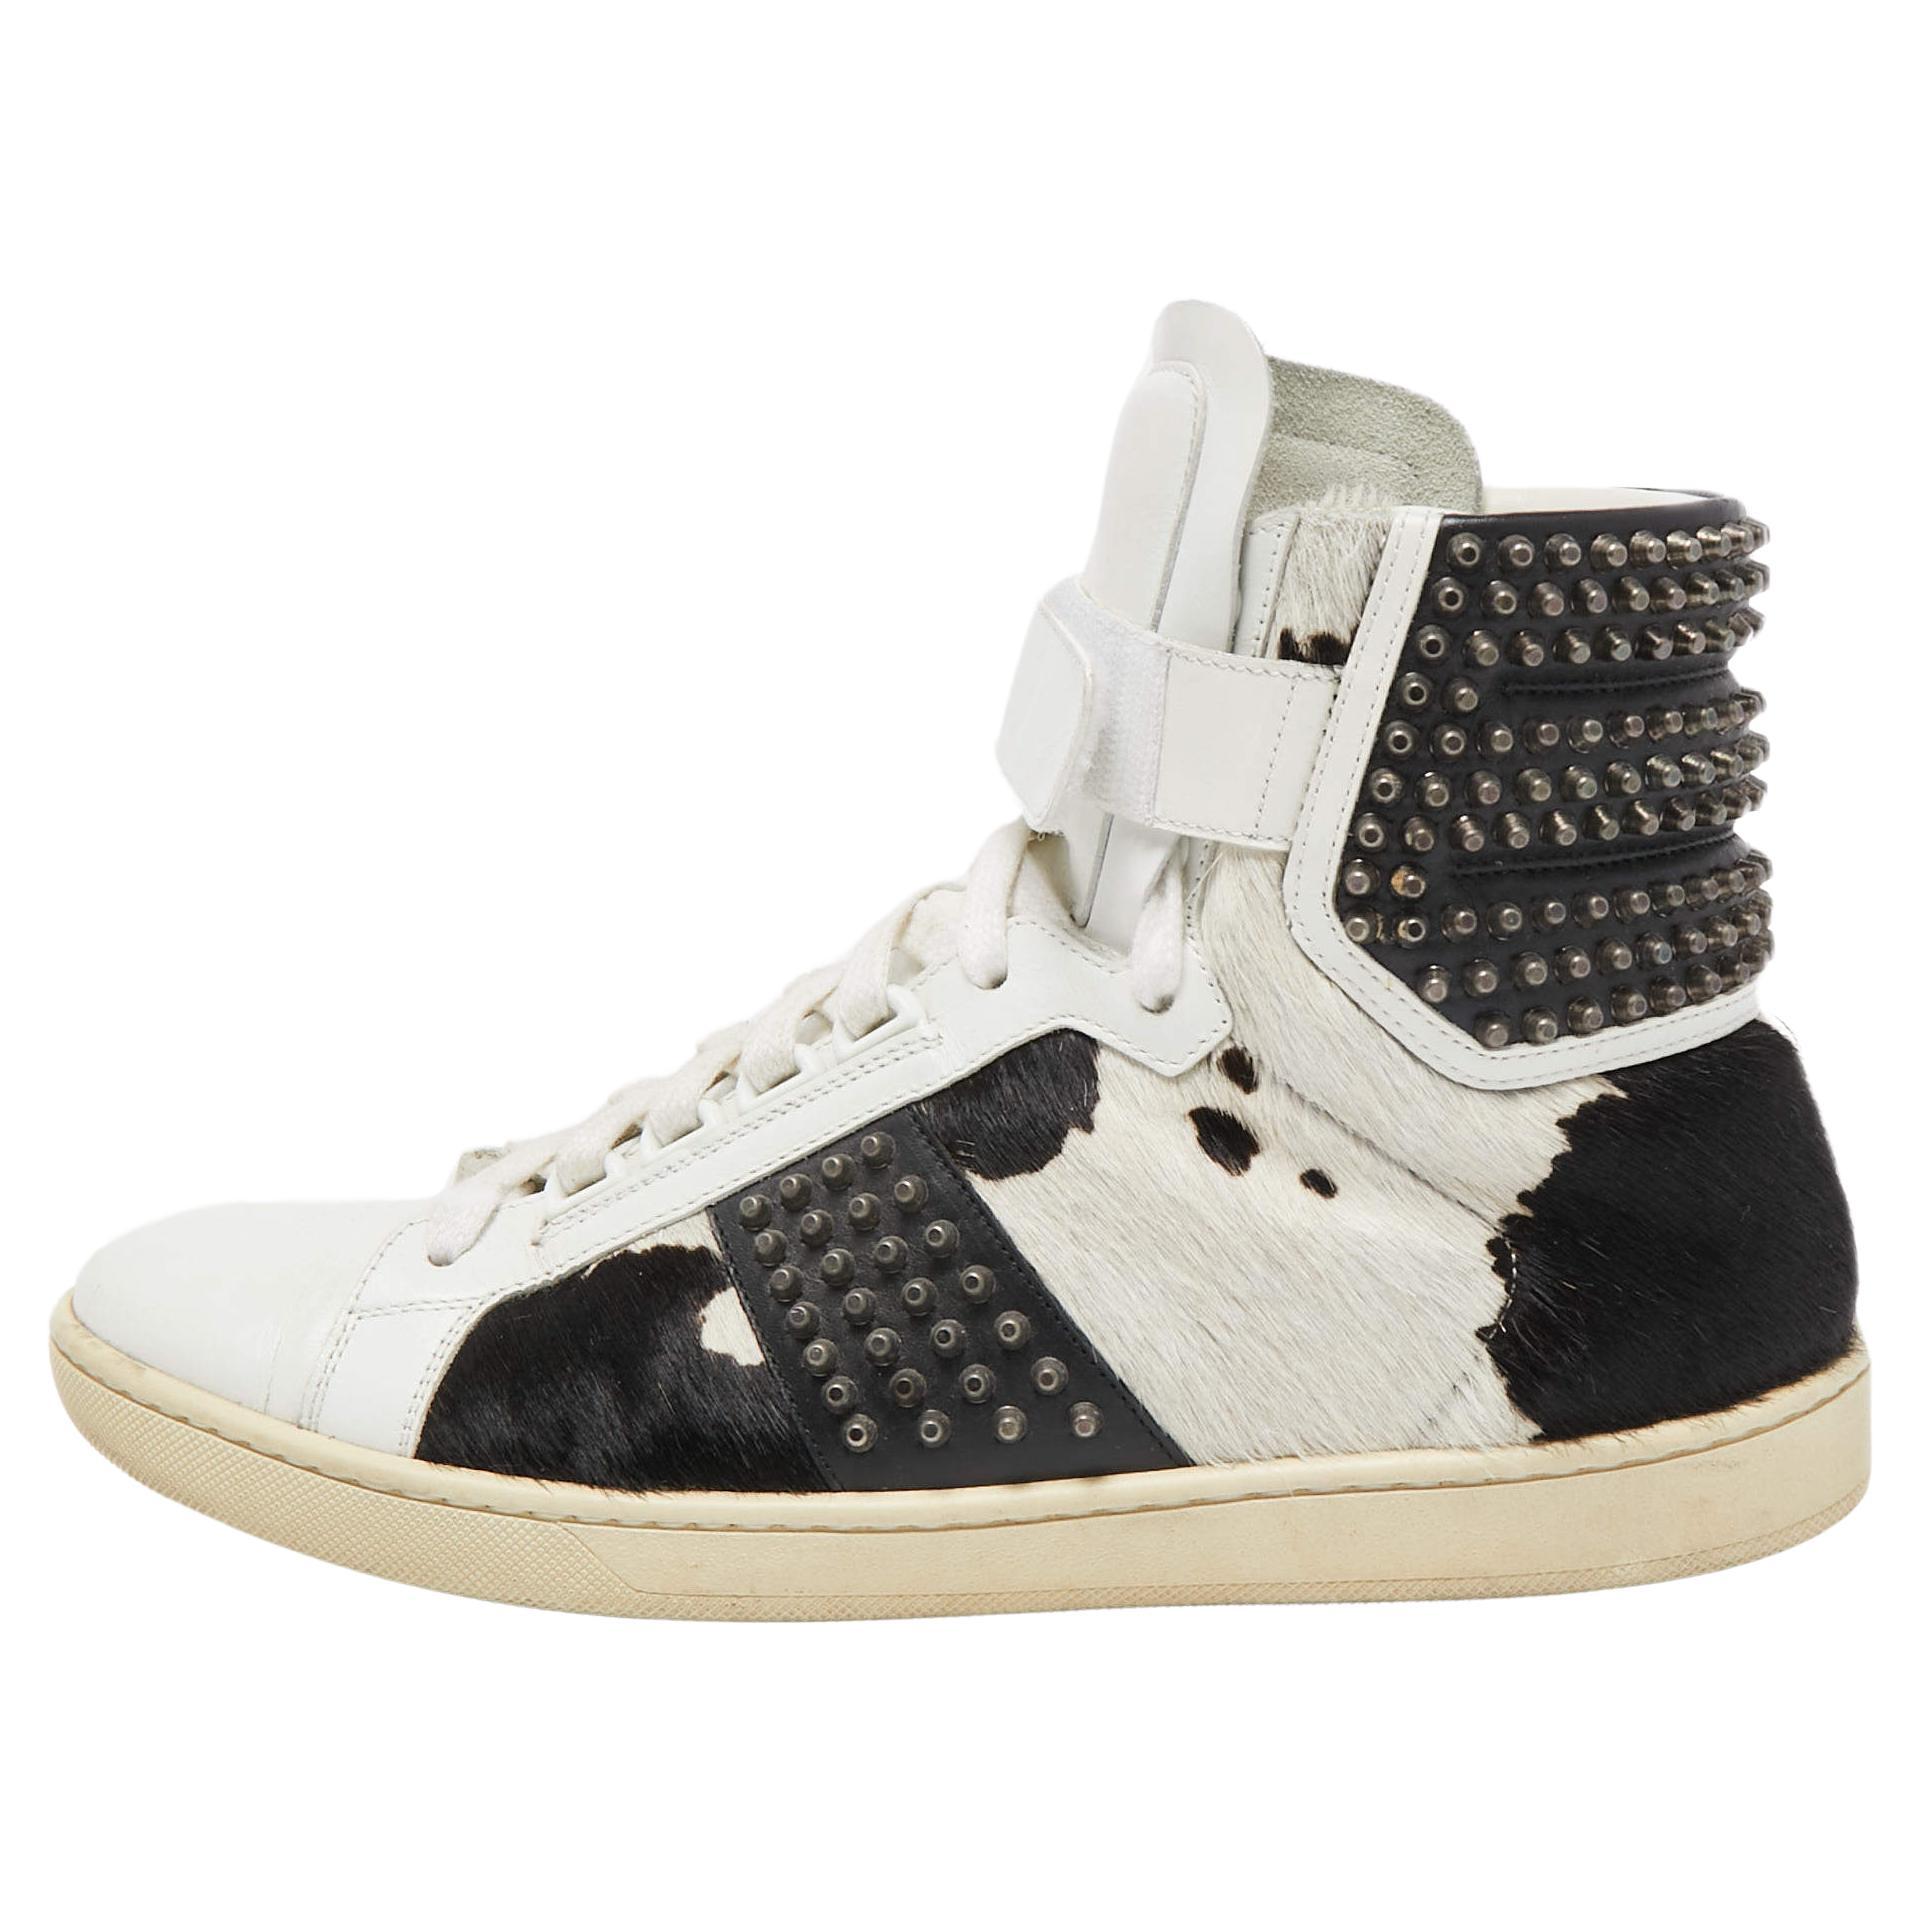 Saint Laurent Leather and Calf Hair Studded High Top Sneakers Size 41 For Sale